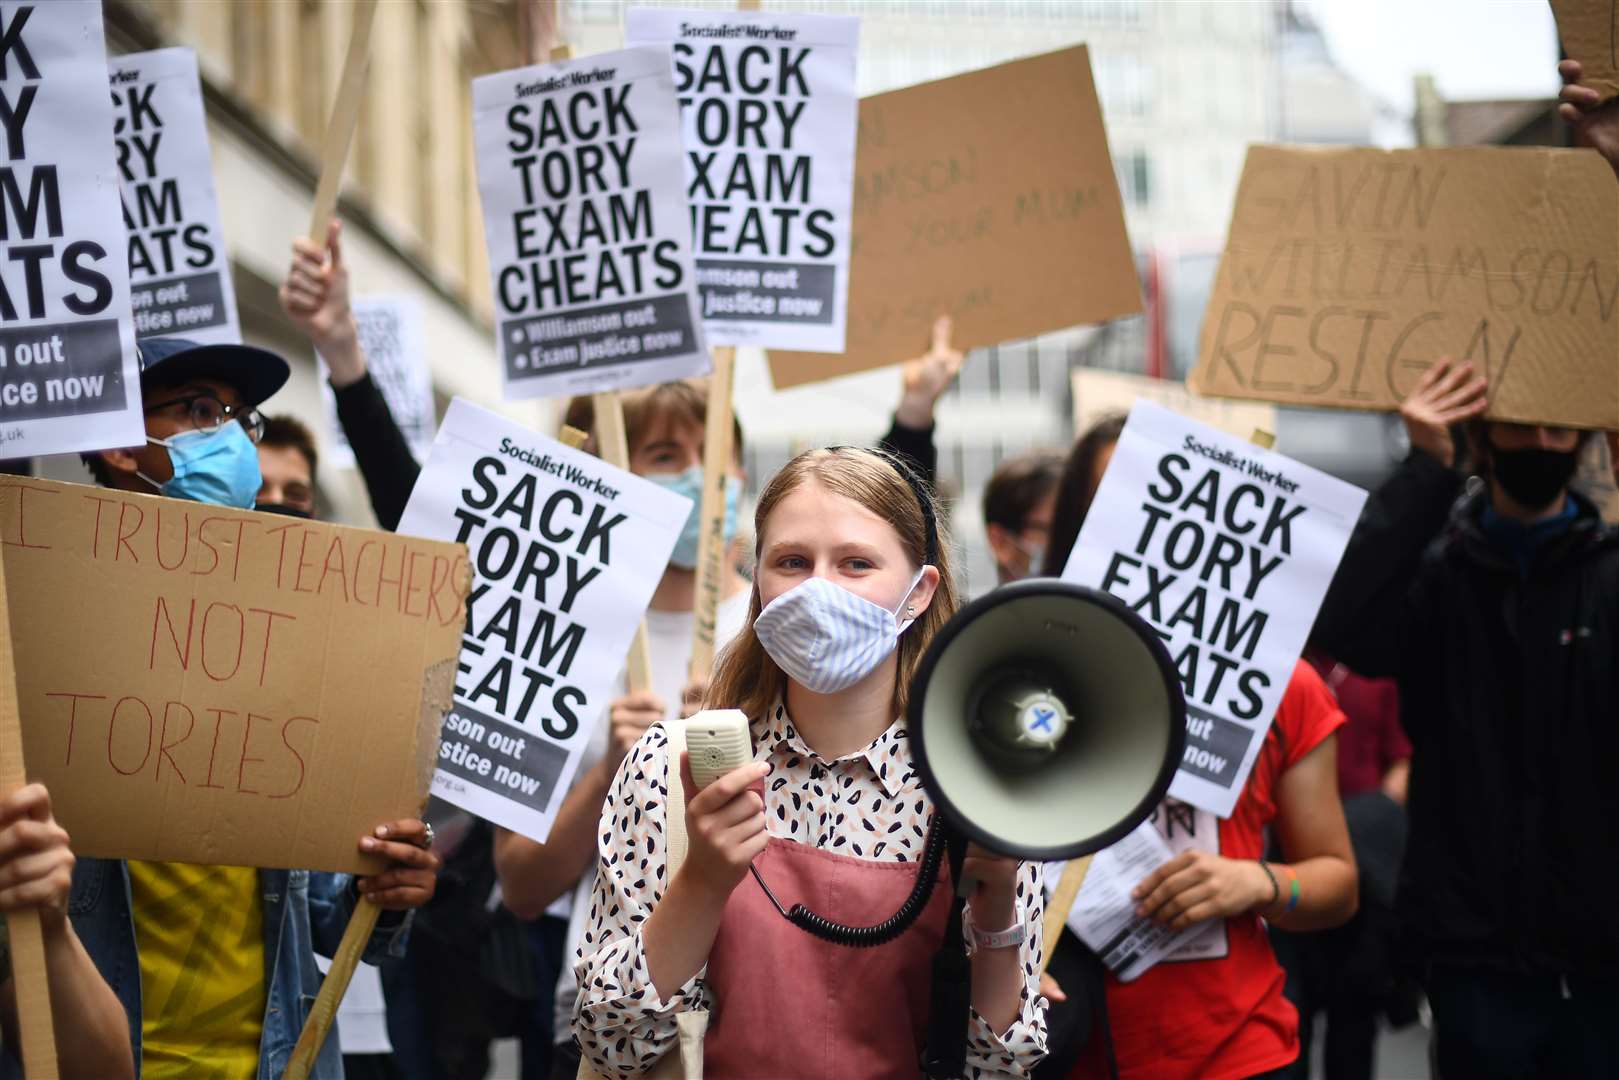 People take part in a protest outside the Department for Education over A-level results (Victoria Jones/PA)